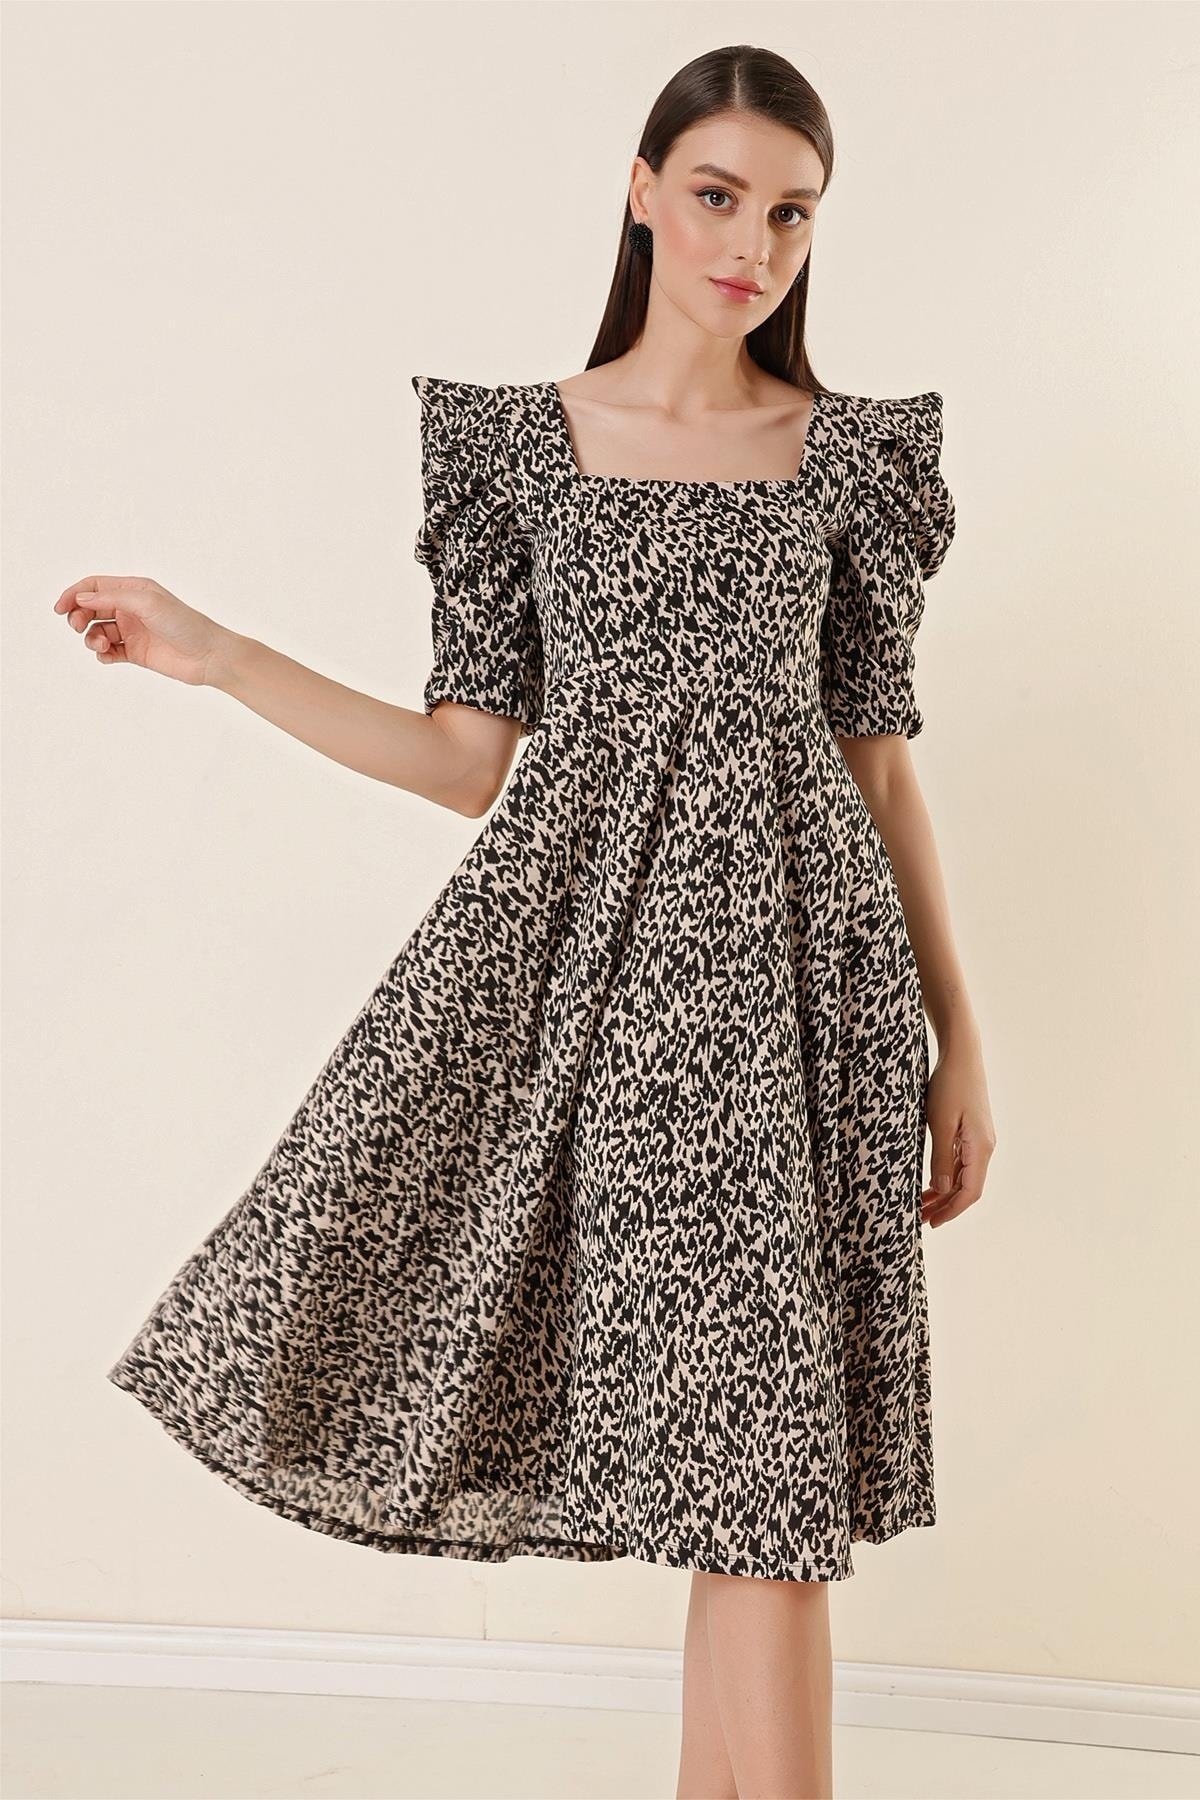 By Saygı Square Collar Leopard Patterned Pleated, Flounce Sleeves Dress Black